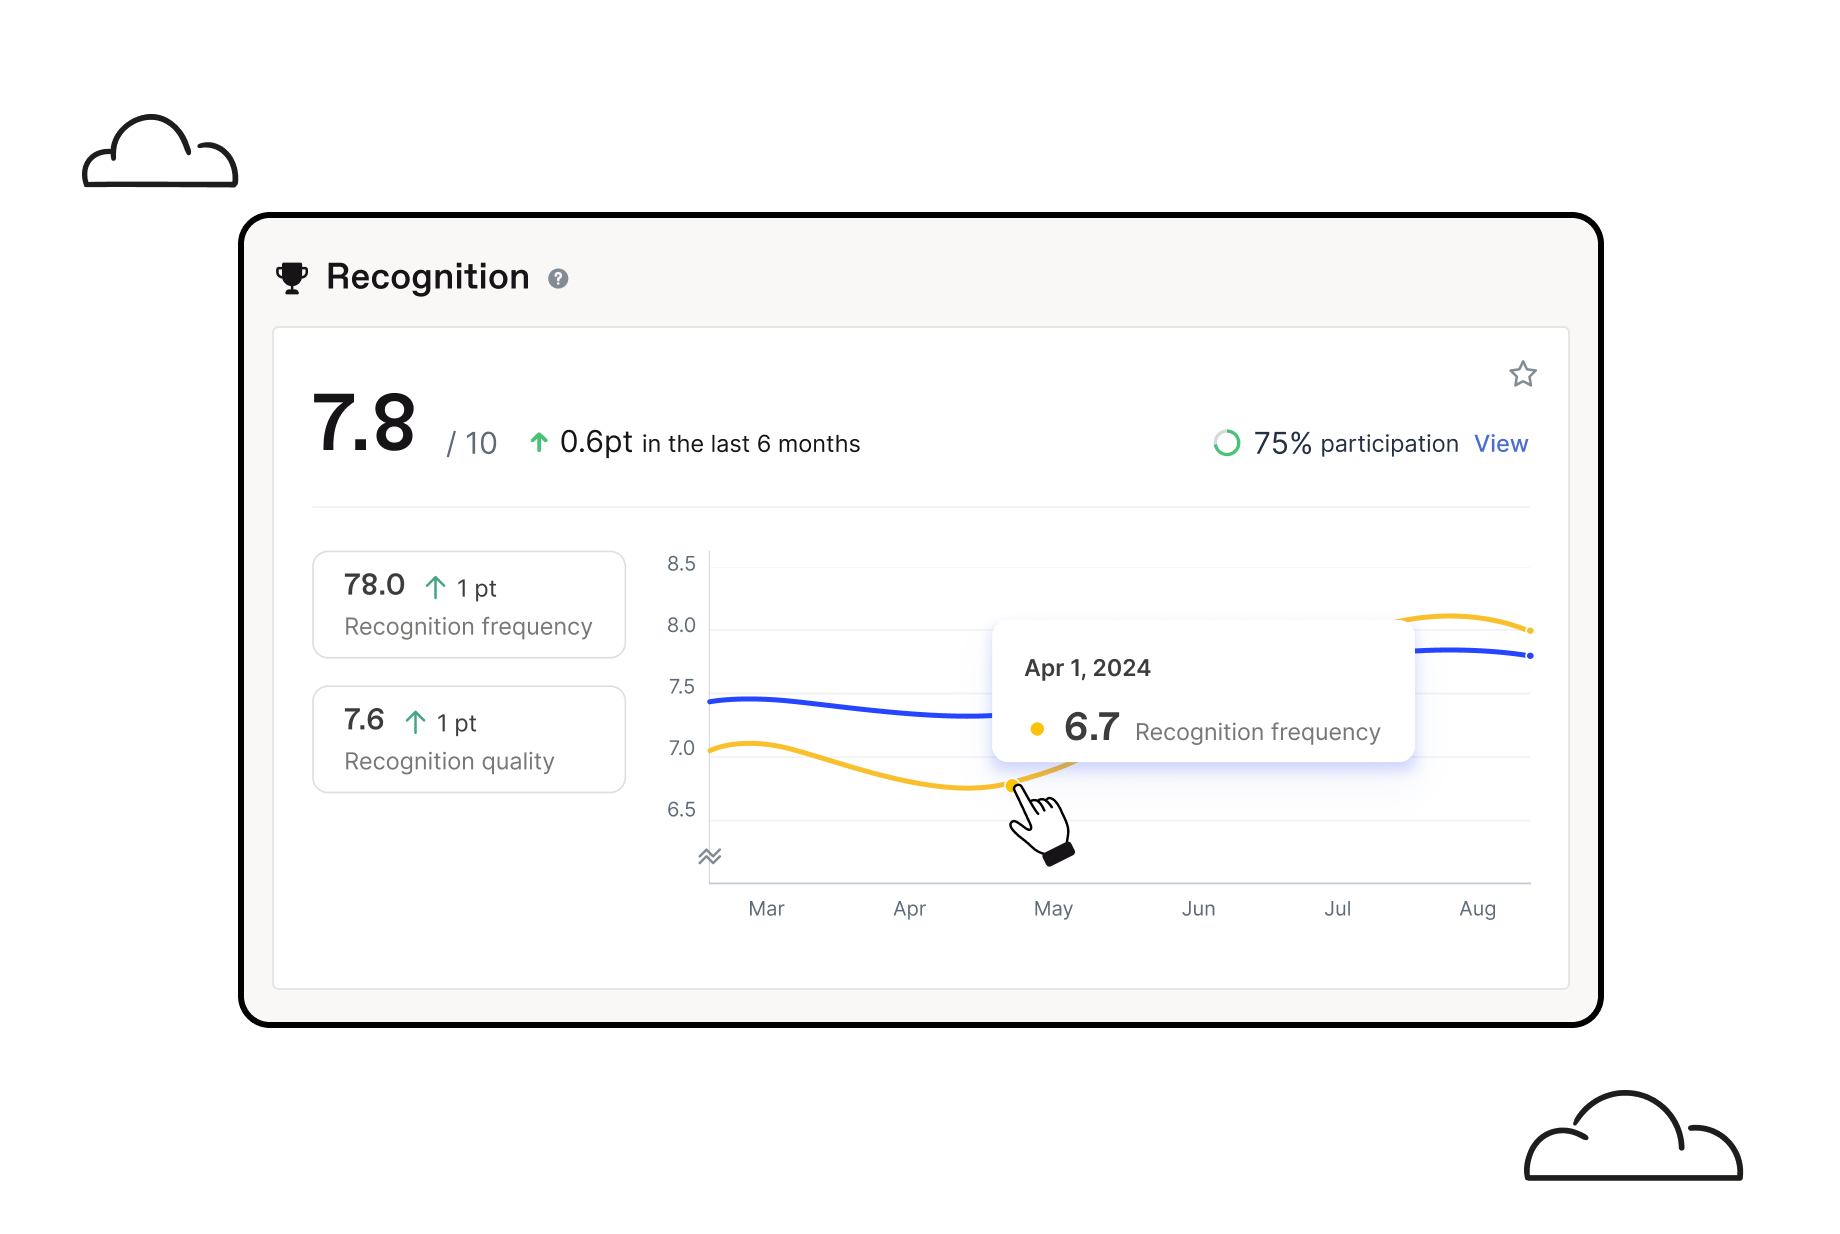 Report of the Recognition metric based on Officevibe’s pulse survey responses for a team with related feedback and questions.